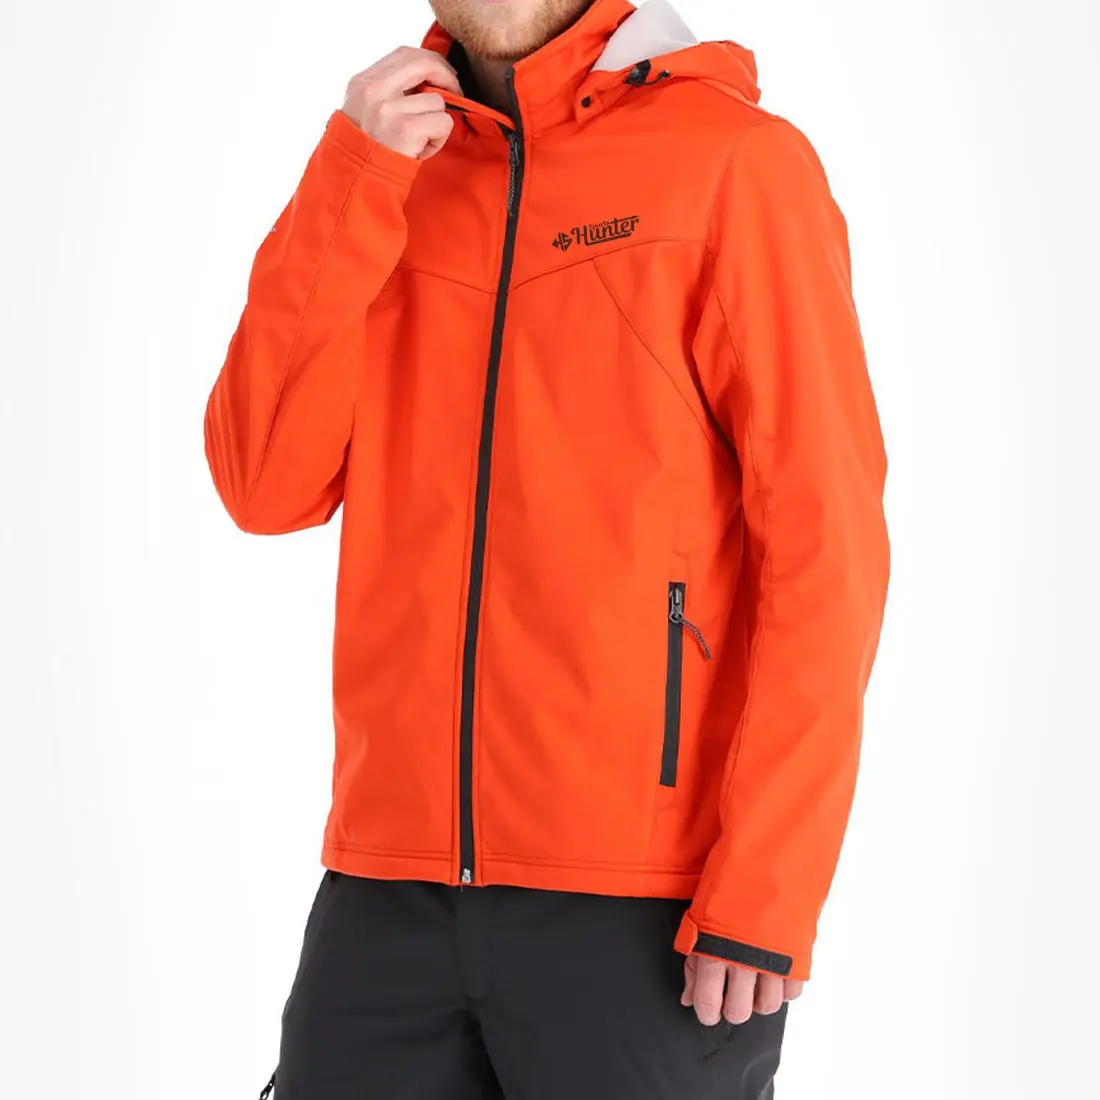 Completely Comfy OEM Service Men's Washable High-Quality Softshell Jacket for Running Training & Winter Wear